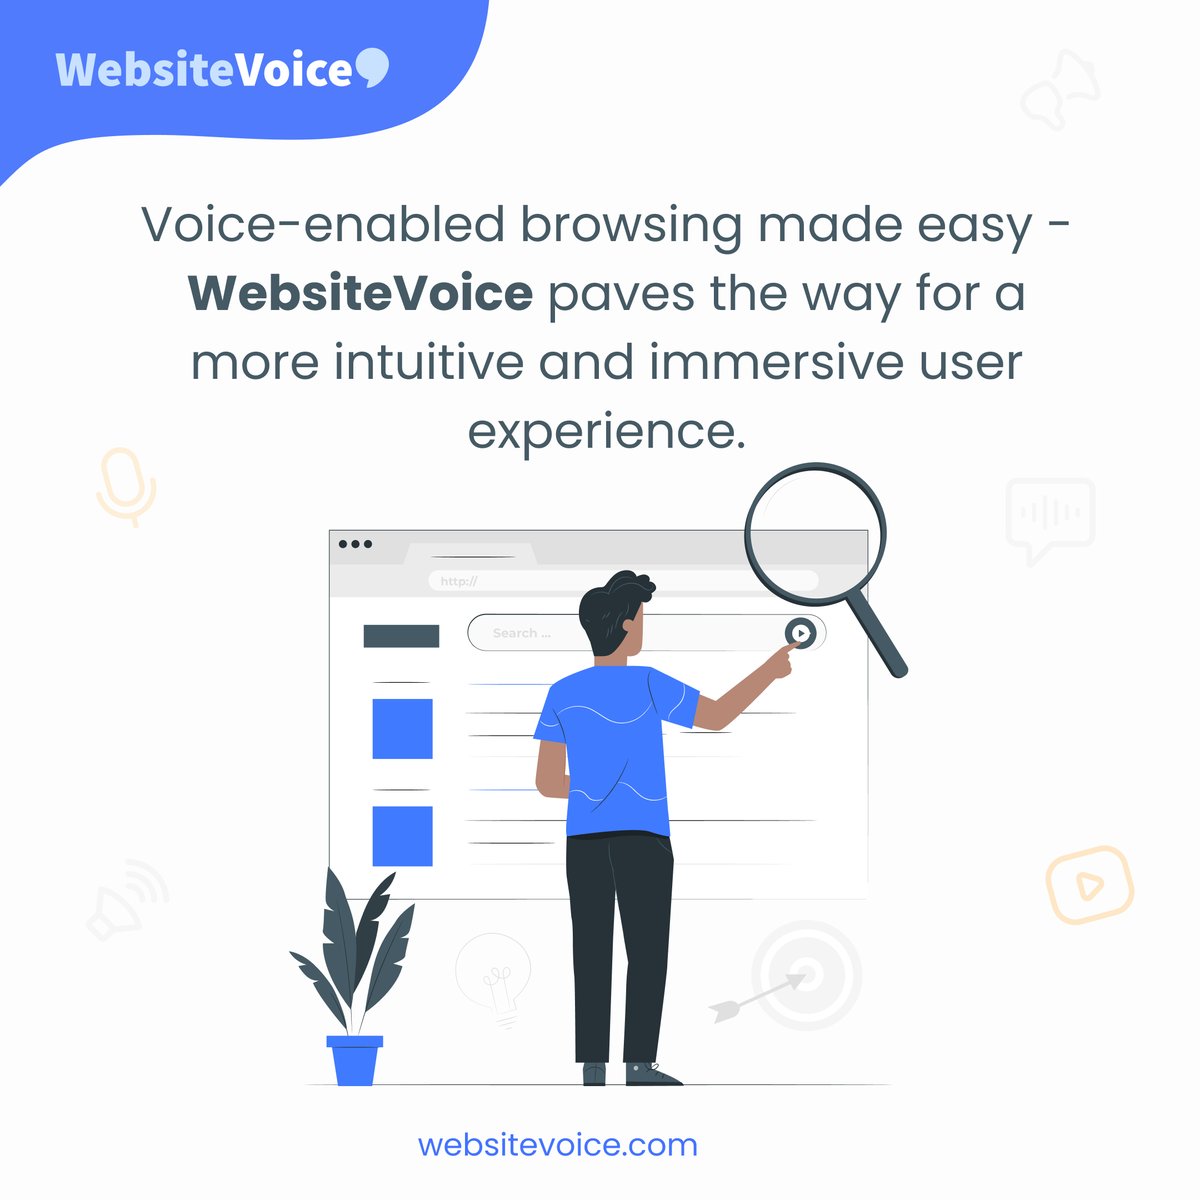 Immerse yourself in an intuitive and interactive web experience, as WebsiteVoice paves the way for seamless voice-enabled browsing. 🌐🗣️ 

#WebsiteVoice #VoiceEnabledBrowsing #WebAccessibility #UserExperience #Innovation #TechRevolution #EngagementTips #CaptivatingContent